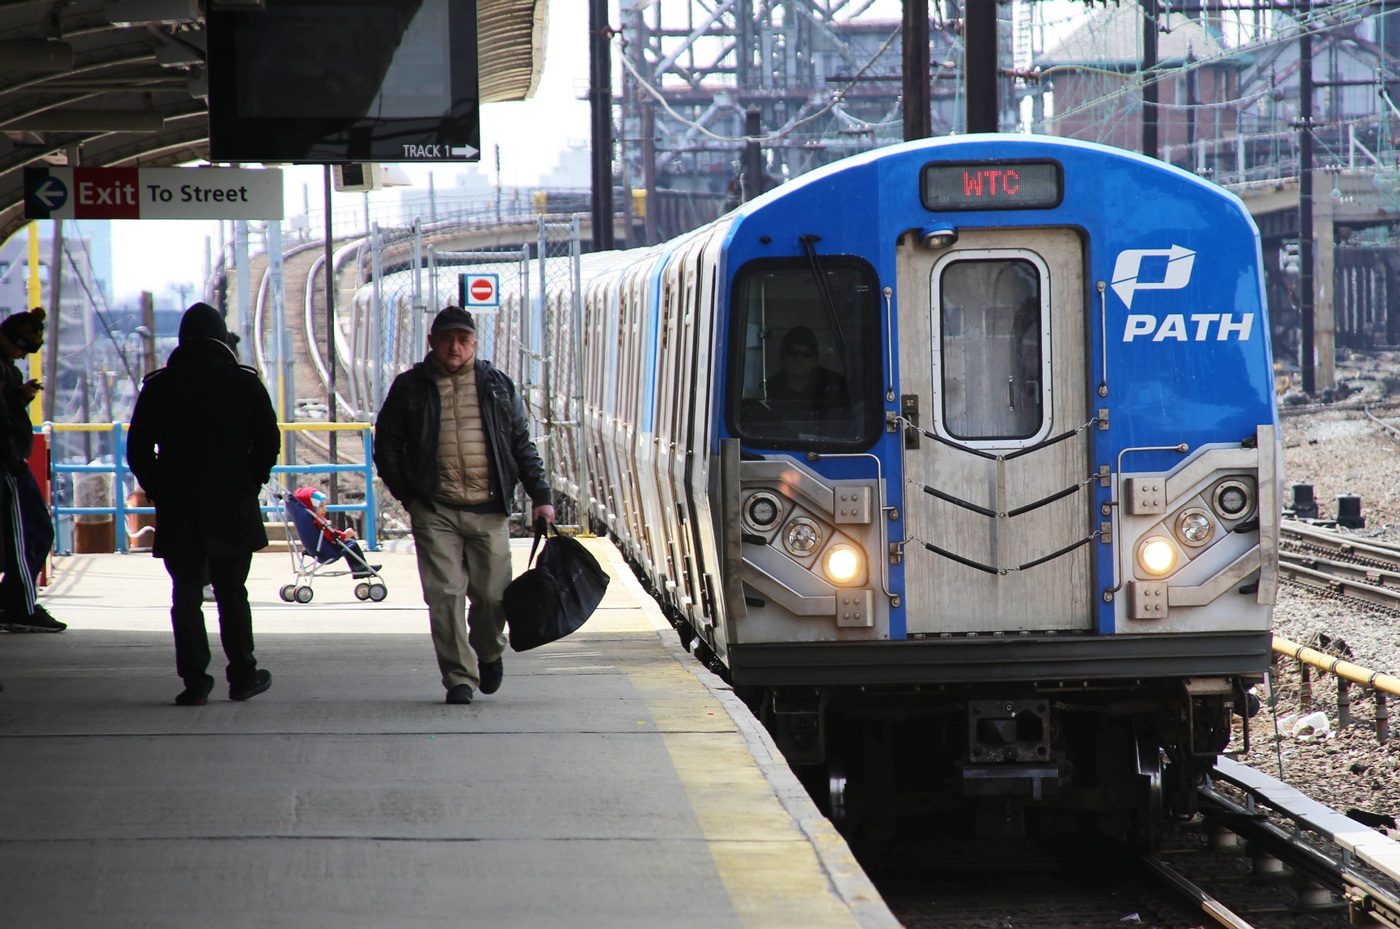 How to get to Prudential Center in Newark, Nj by Bus, Train or Subway?